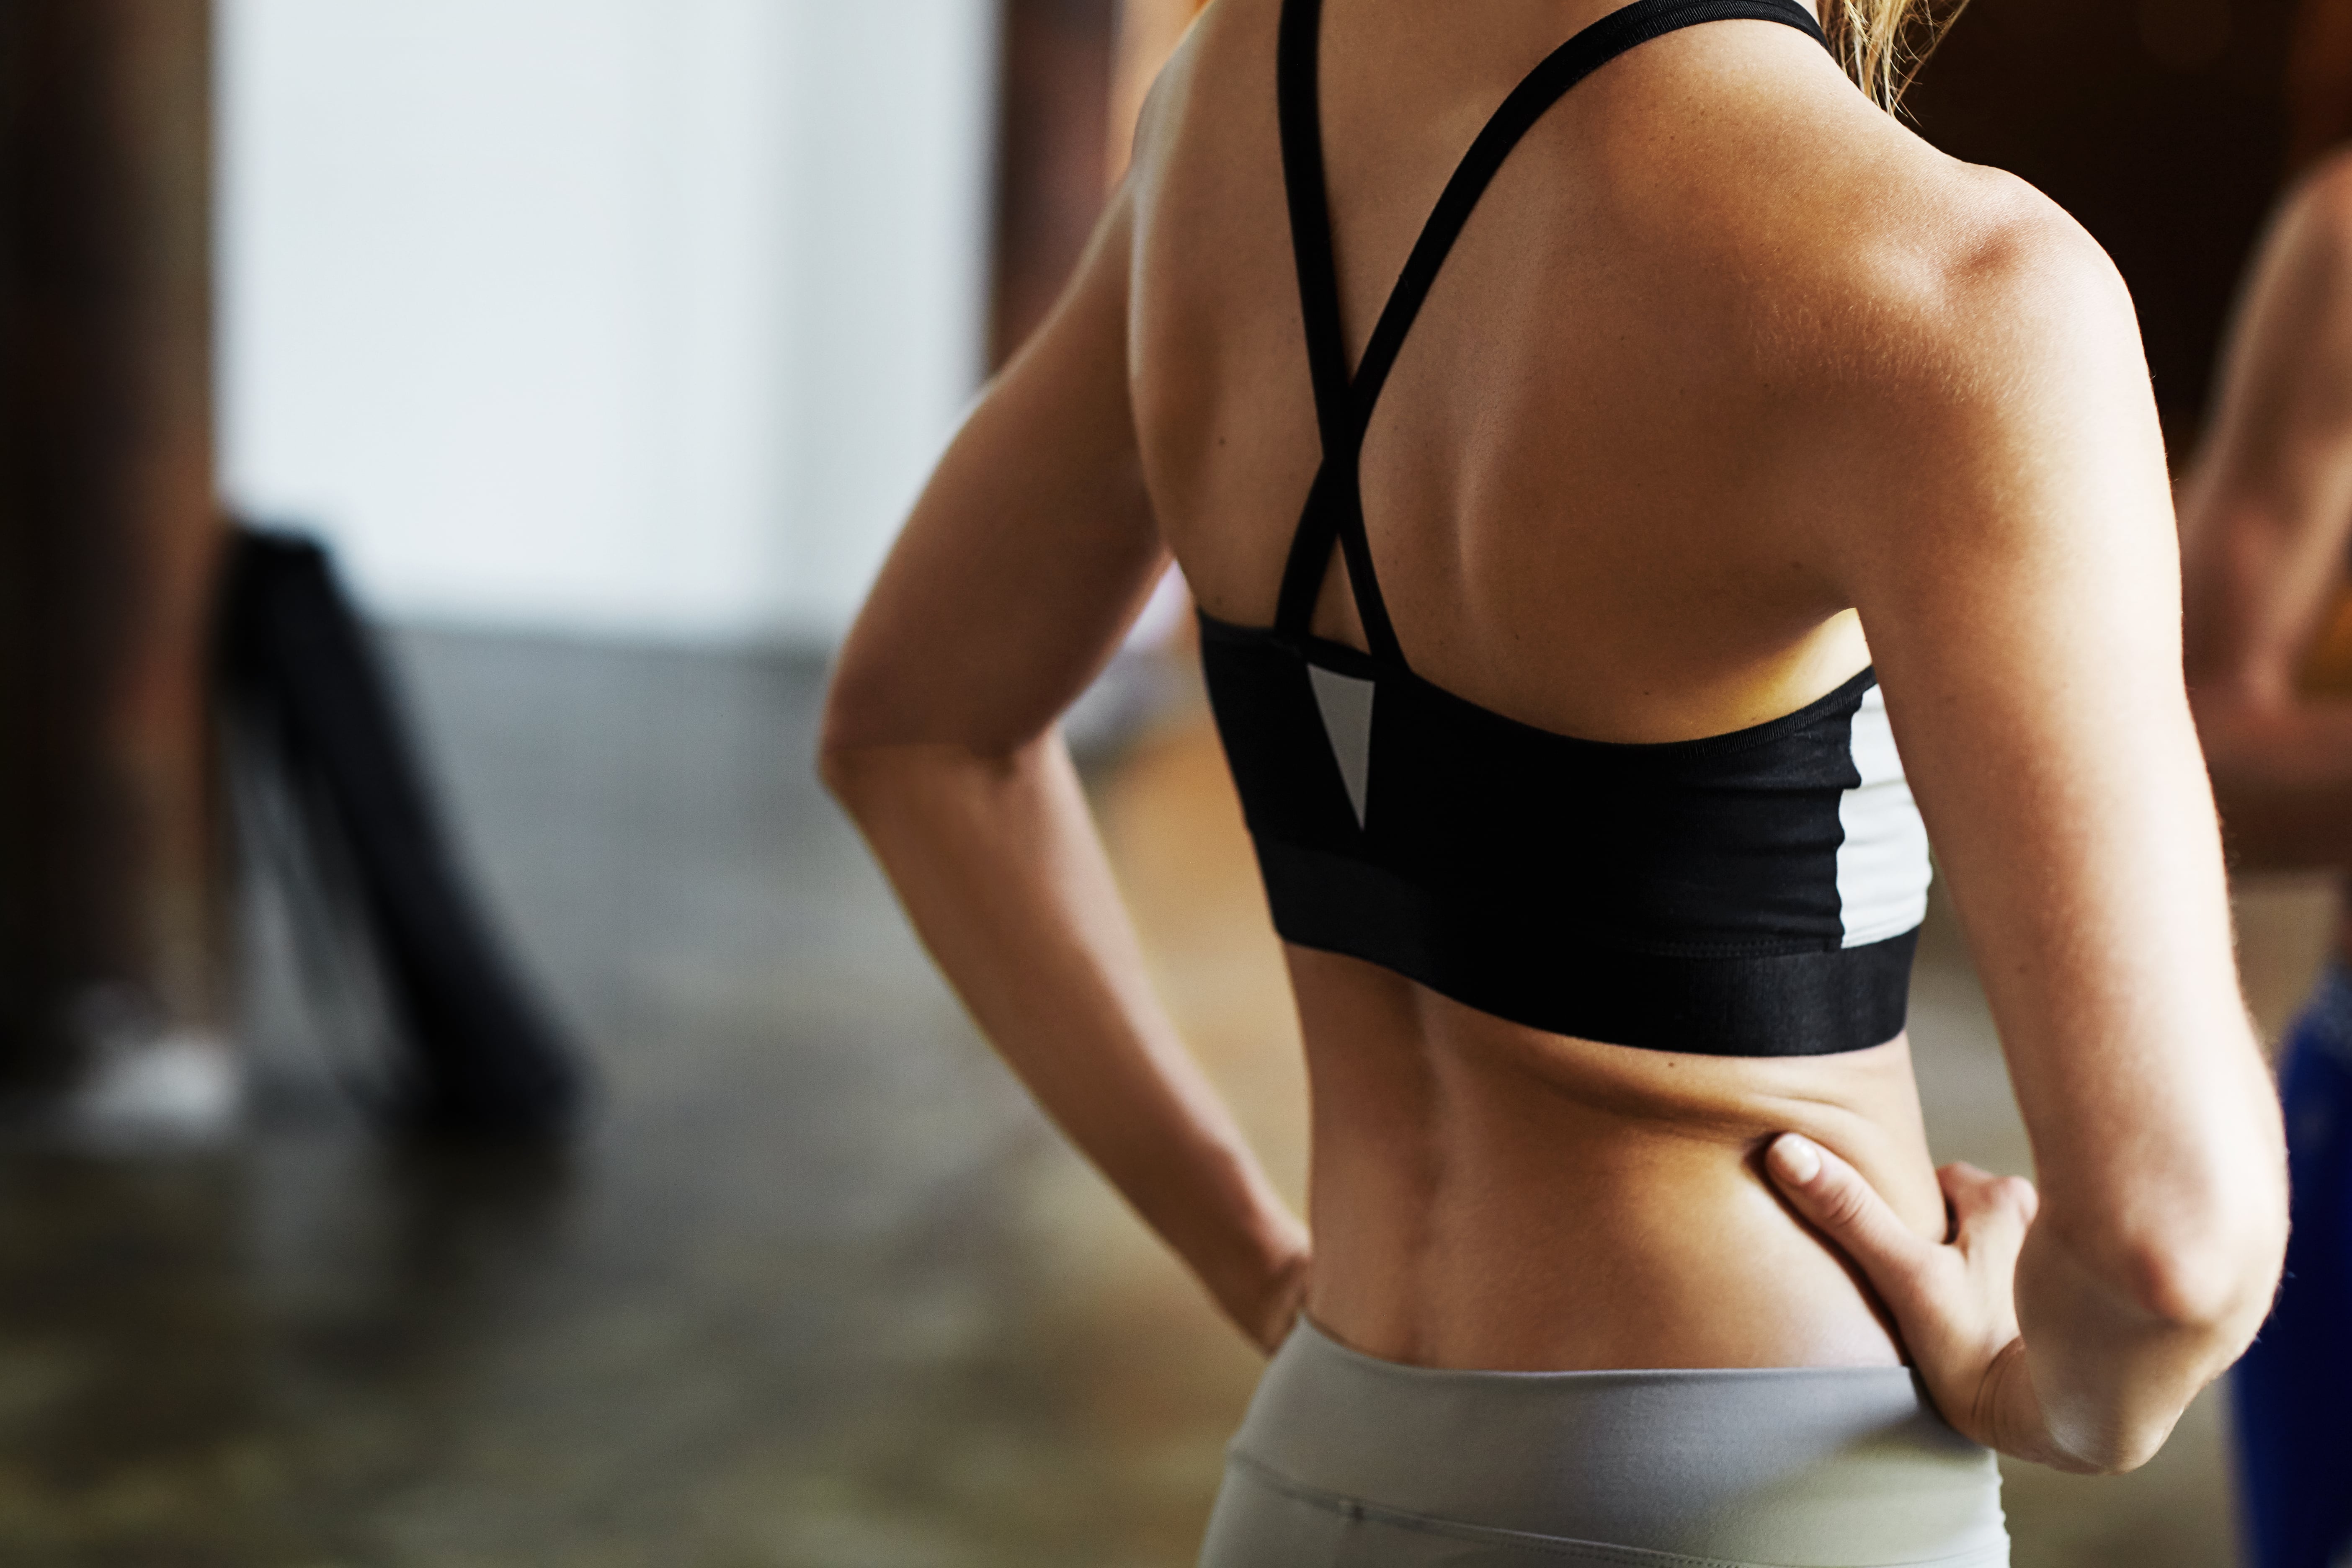 Wearing a Sports Bra That Is Too Tight Can Affect Breathing While  Exercising, a Study Shows